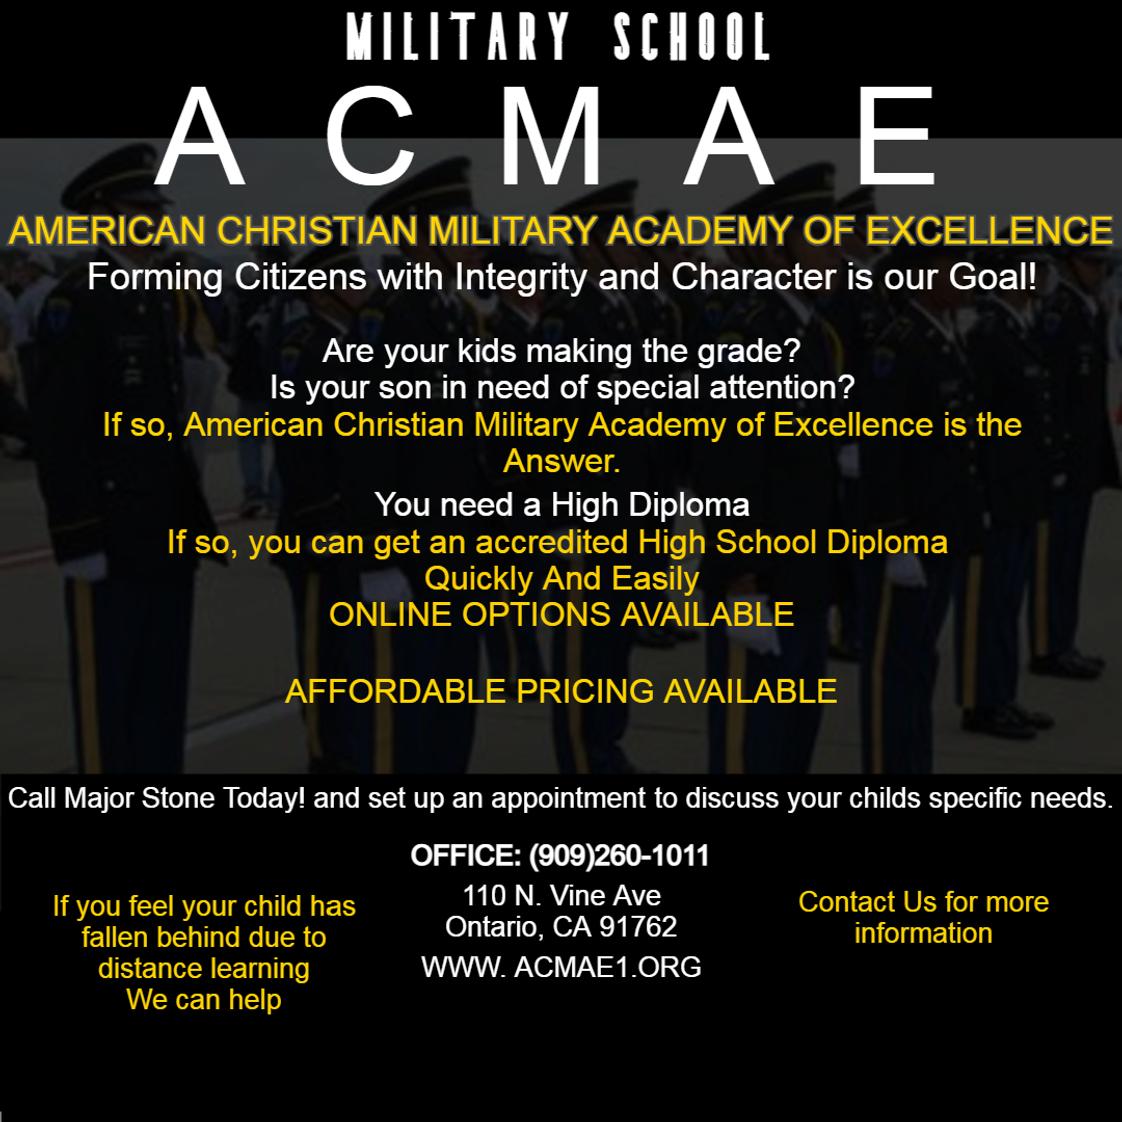 American Christian Military Academy Of Excellence Photo #1 - www.acmae1.org Contact info909 260 1011paulinegstone@aol.com